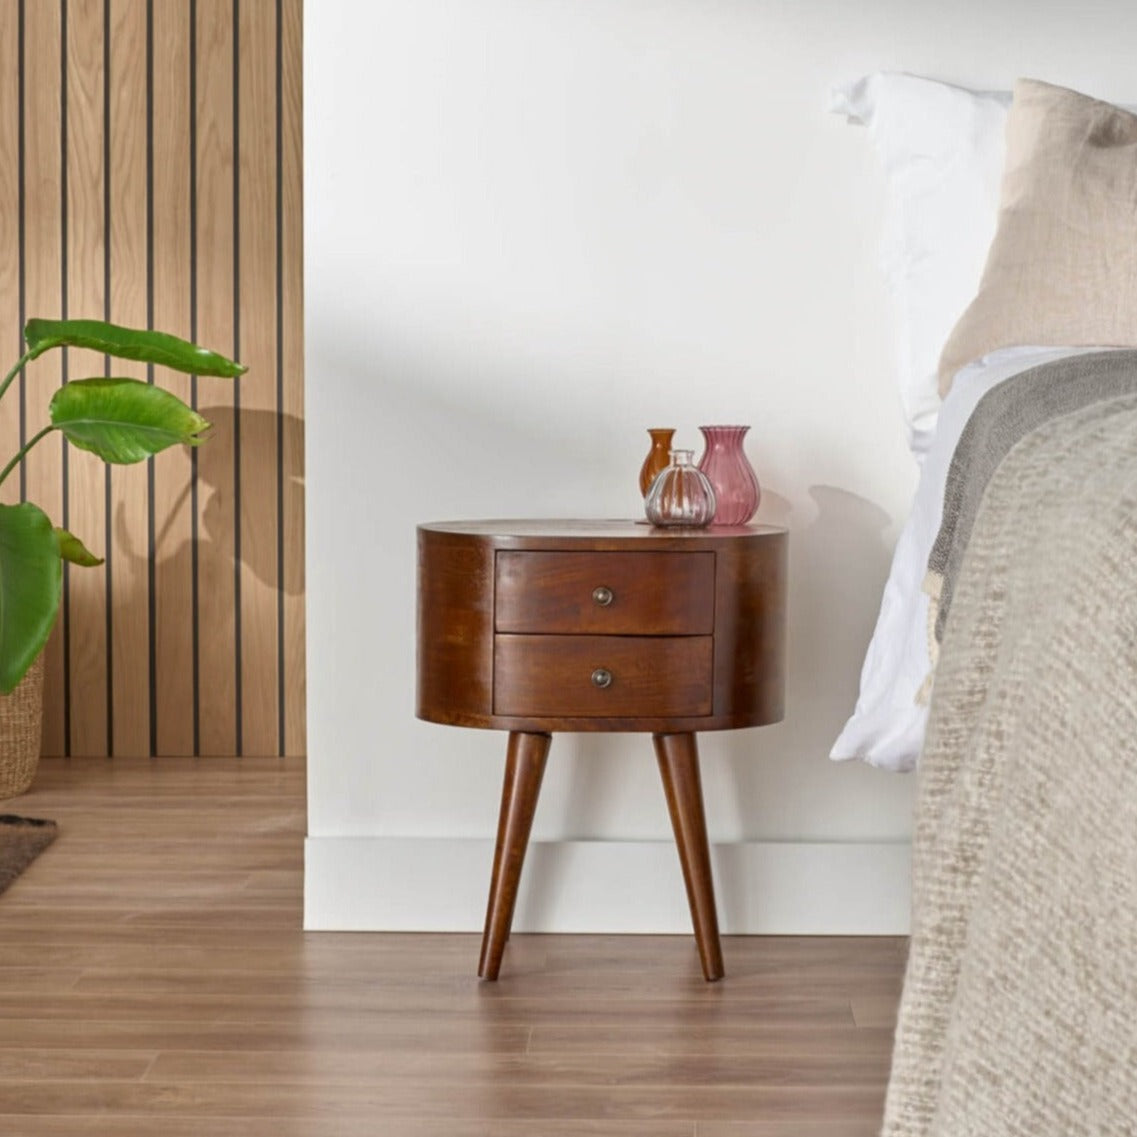 walnut bed side table uk dark brown wood curved nightstand chest ukround bedside table dark wood uk Oval Bedside Table with 2 Compact Drawers in Dark Chestnut Solid Mango Wood uk Etsy Molina bedside table round  8906057242399